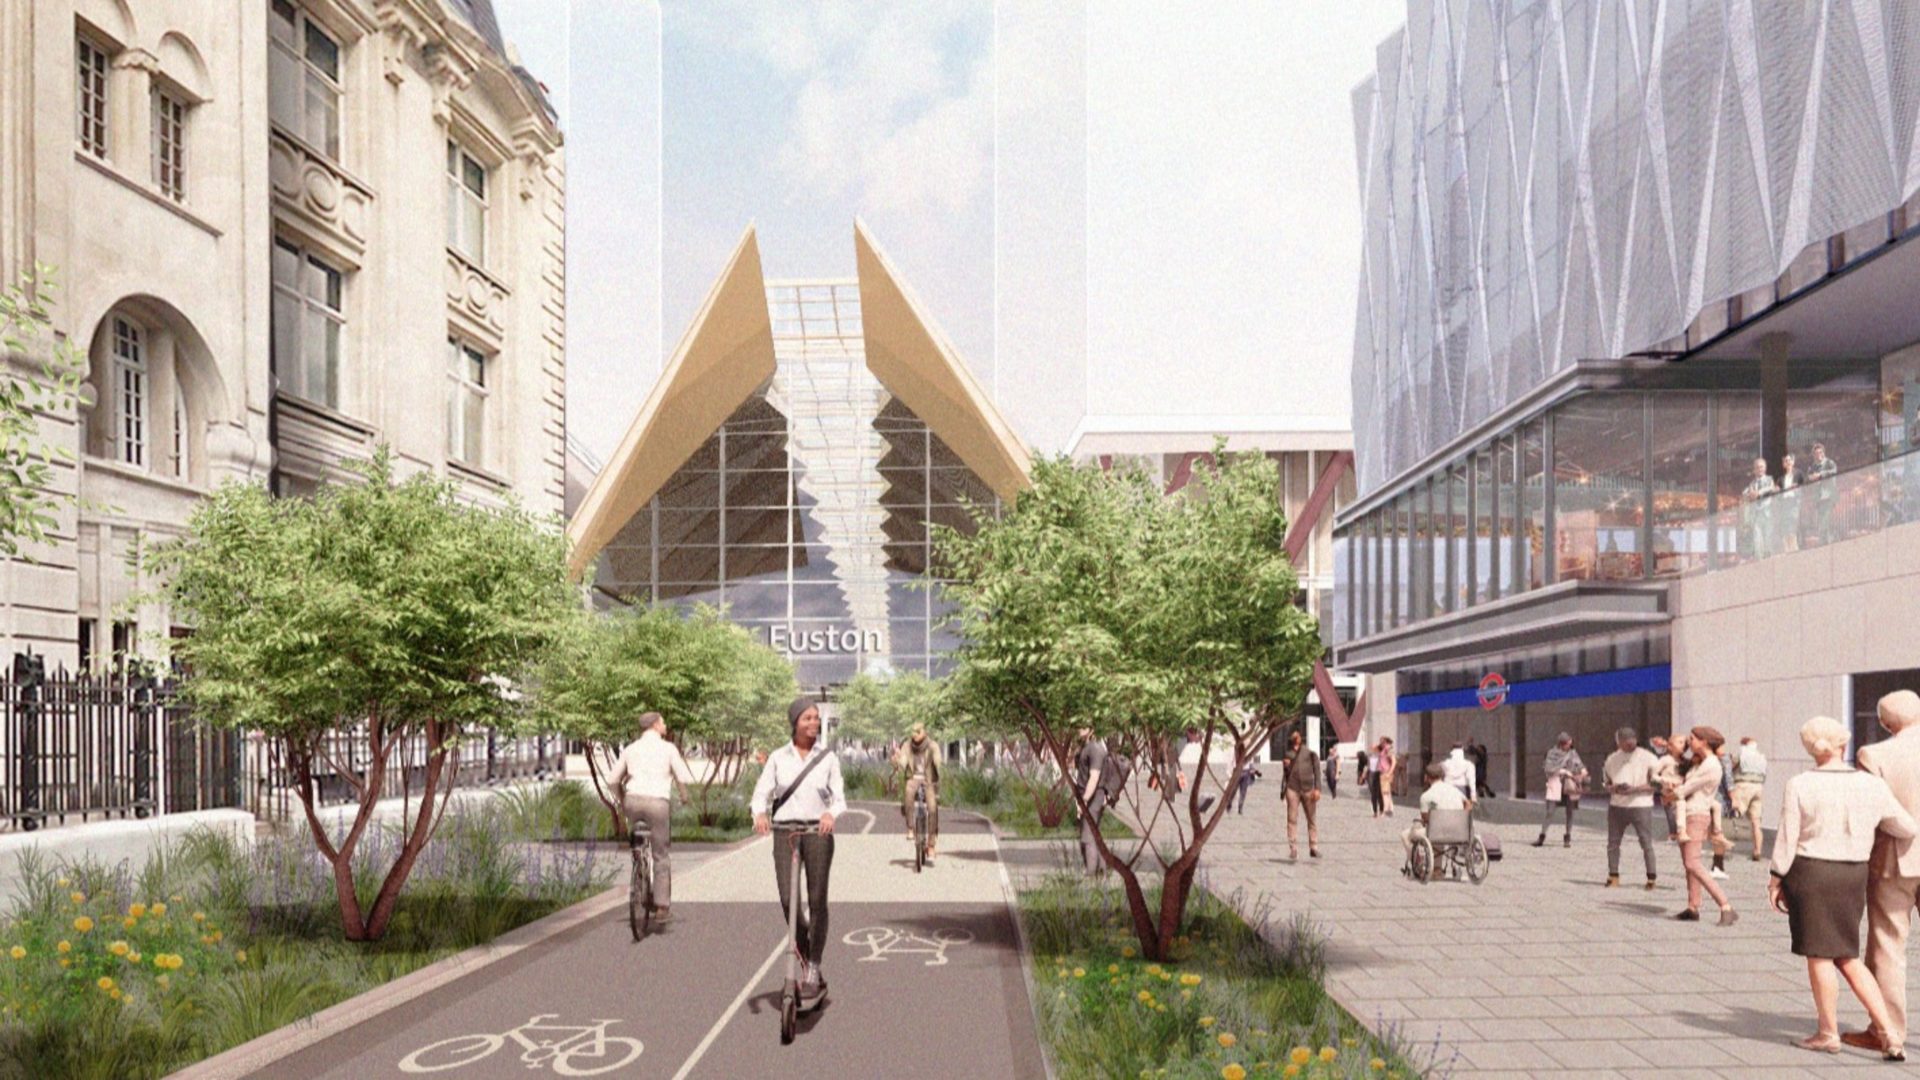 HS2 Euston - A design of a station with a cycle lane, people and trees outside.